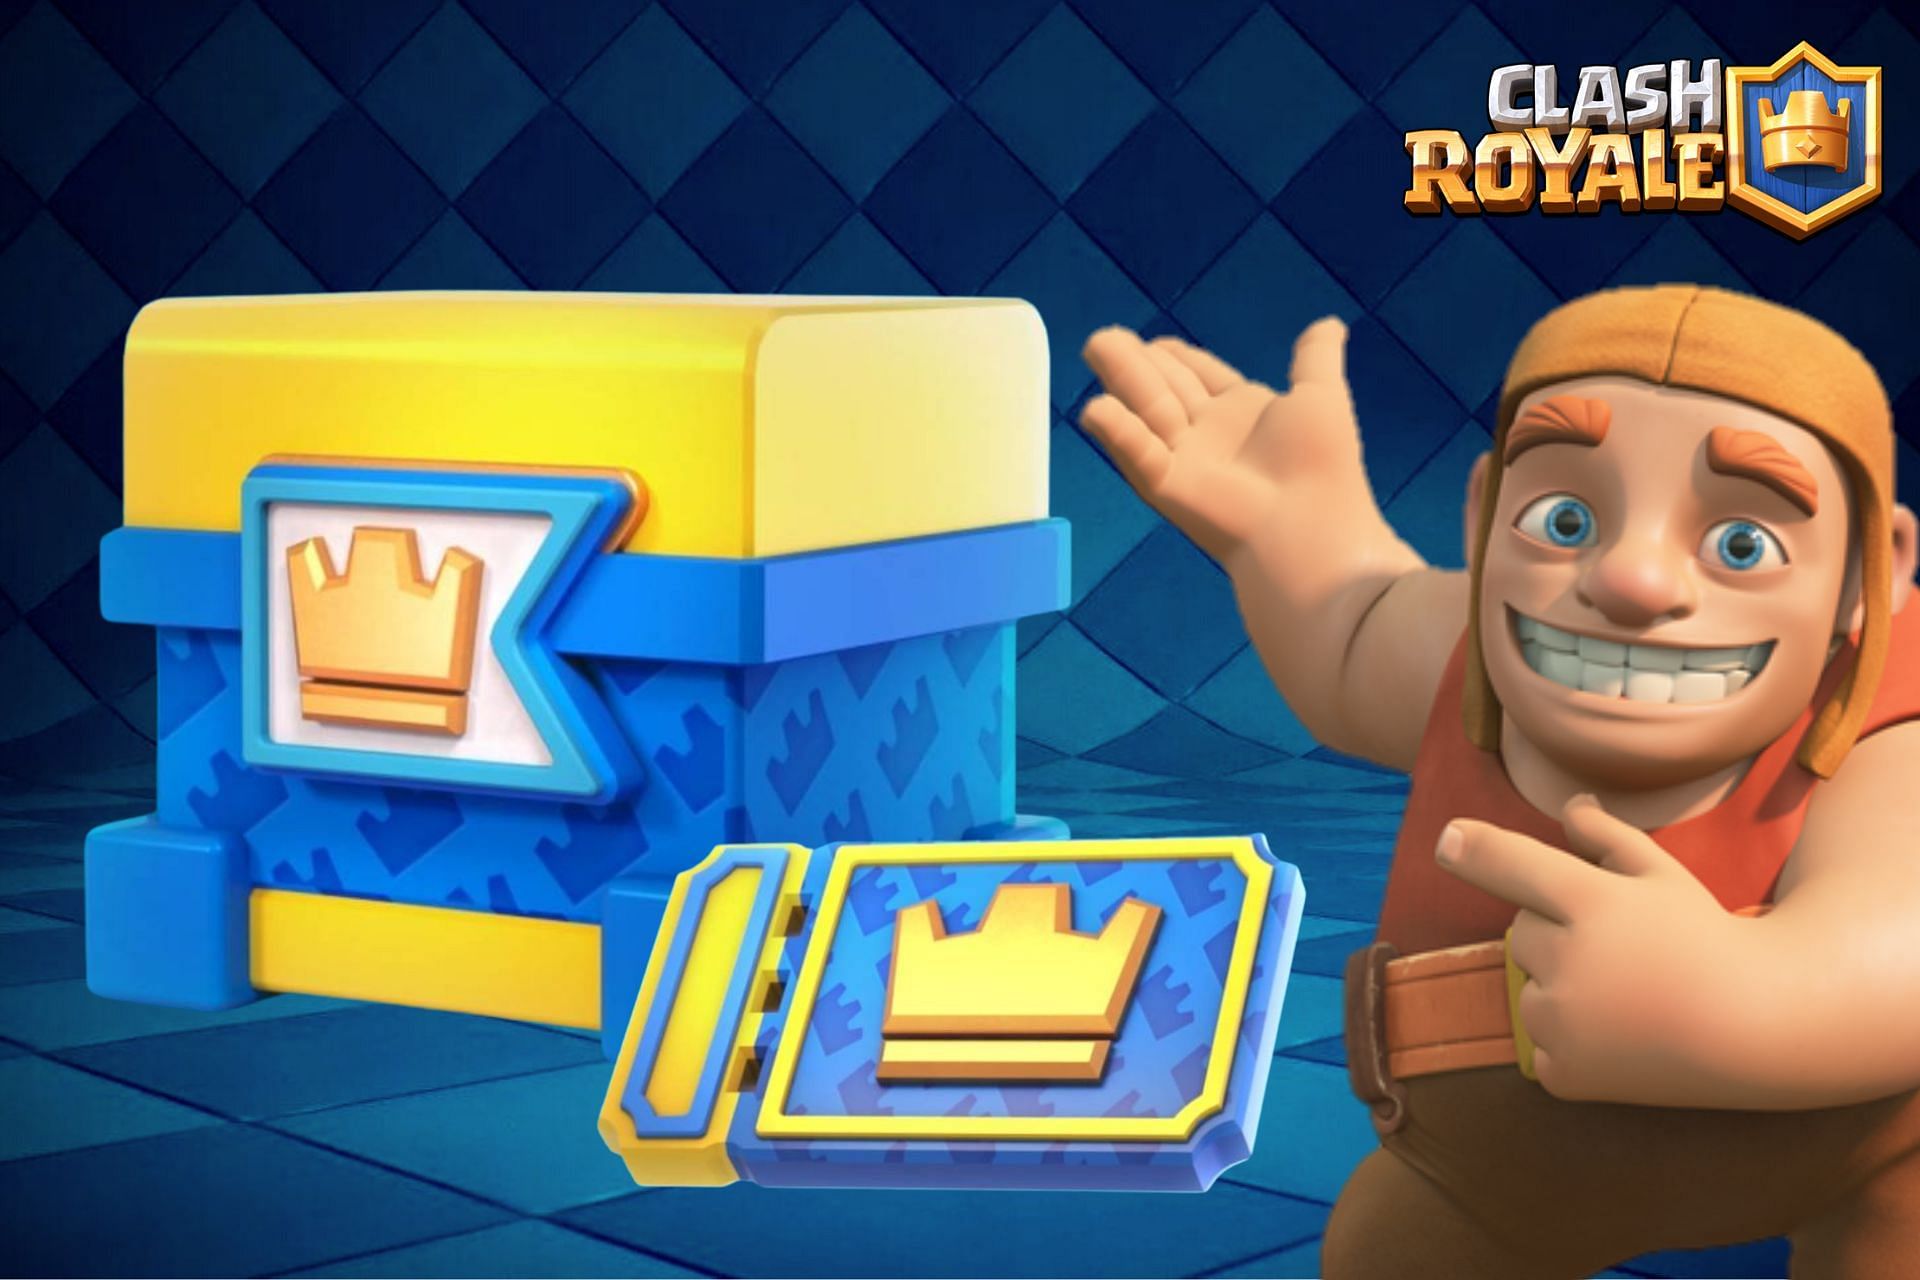 The Battle Banner Launch Event is a special update in Clash Royale (Image via Sportskeeda)